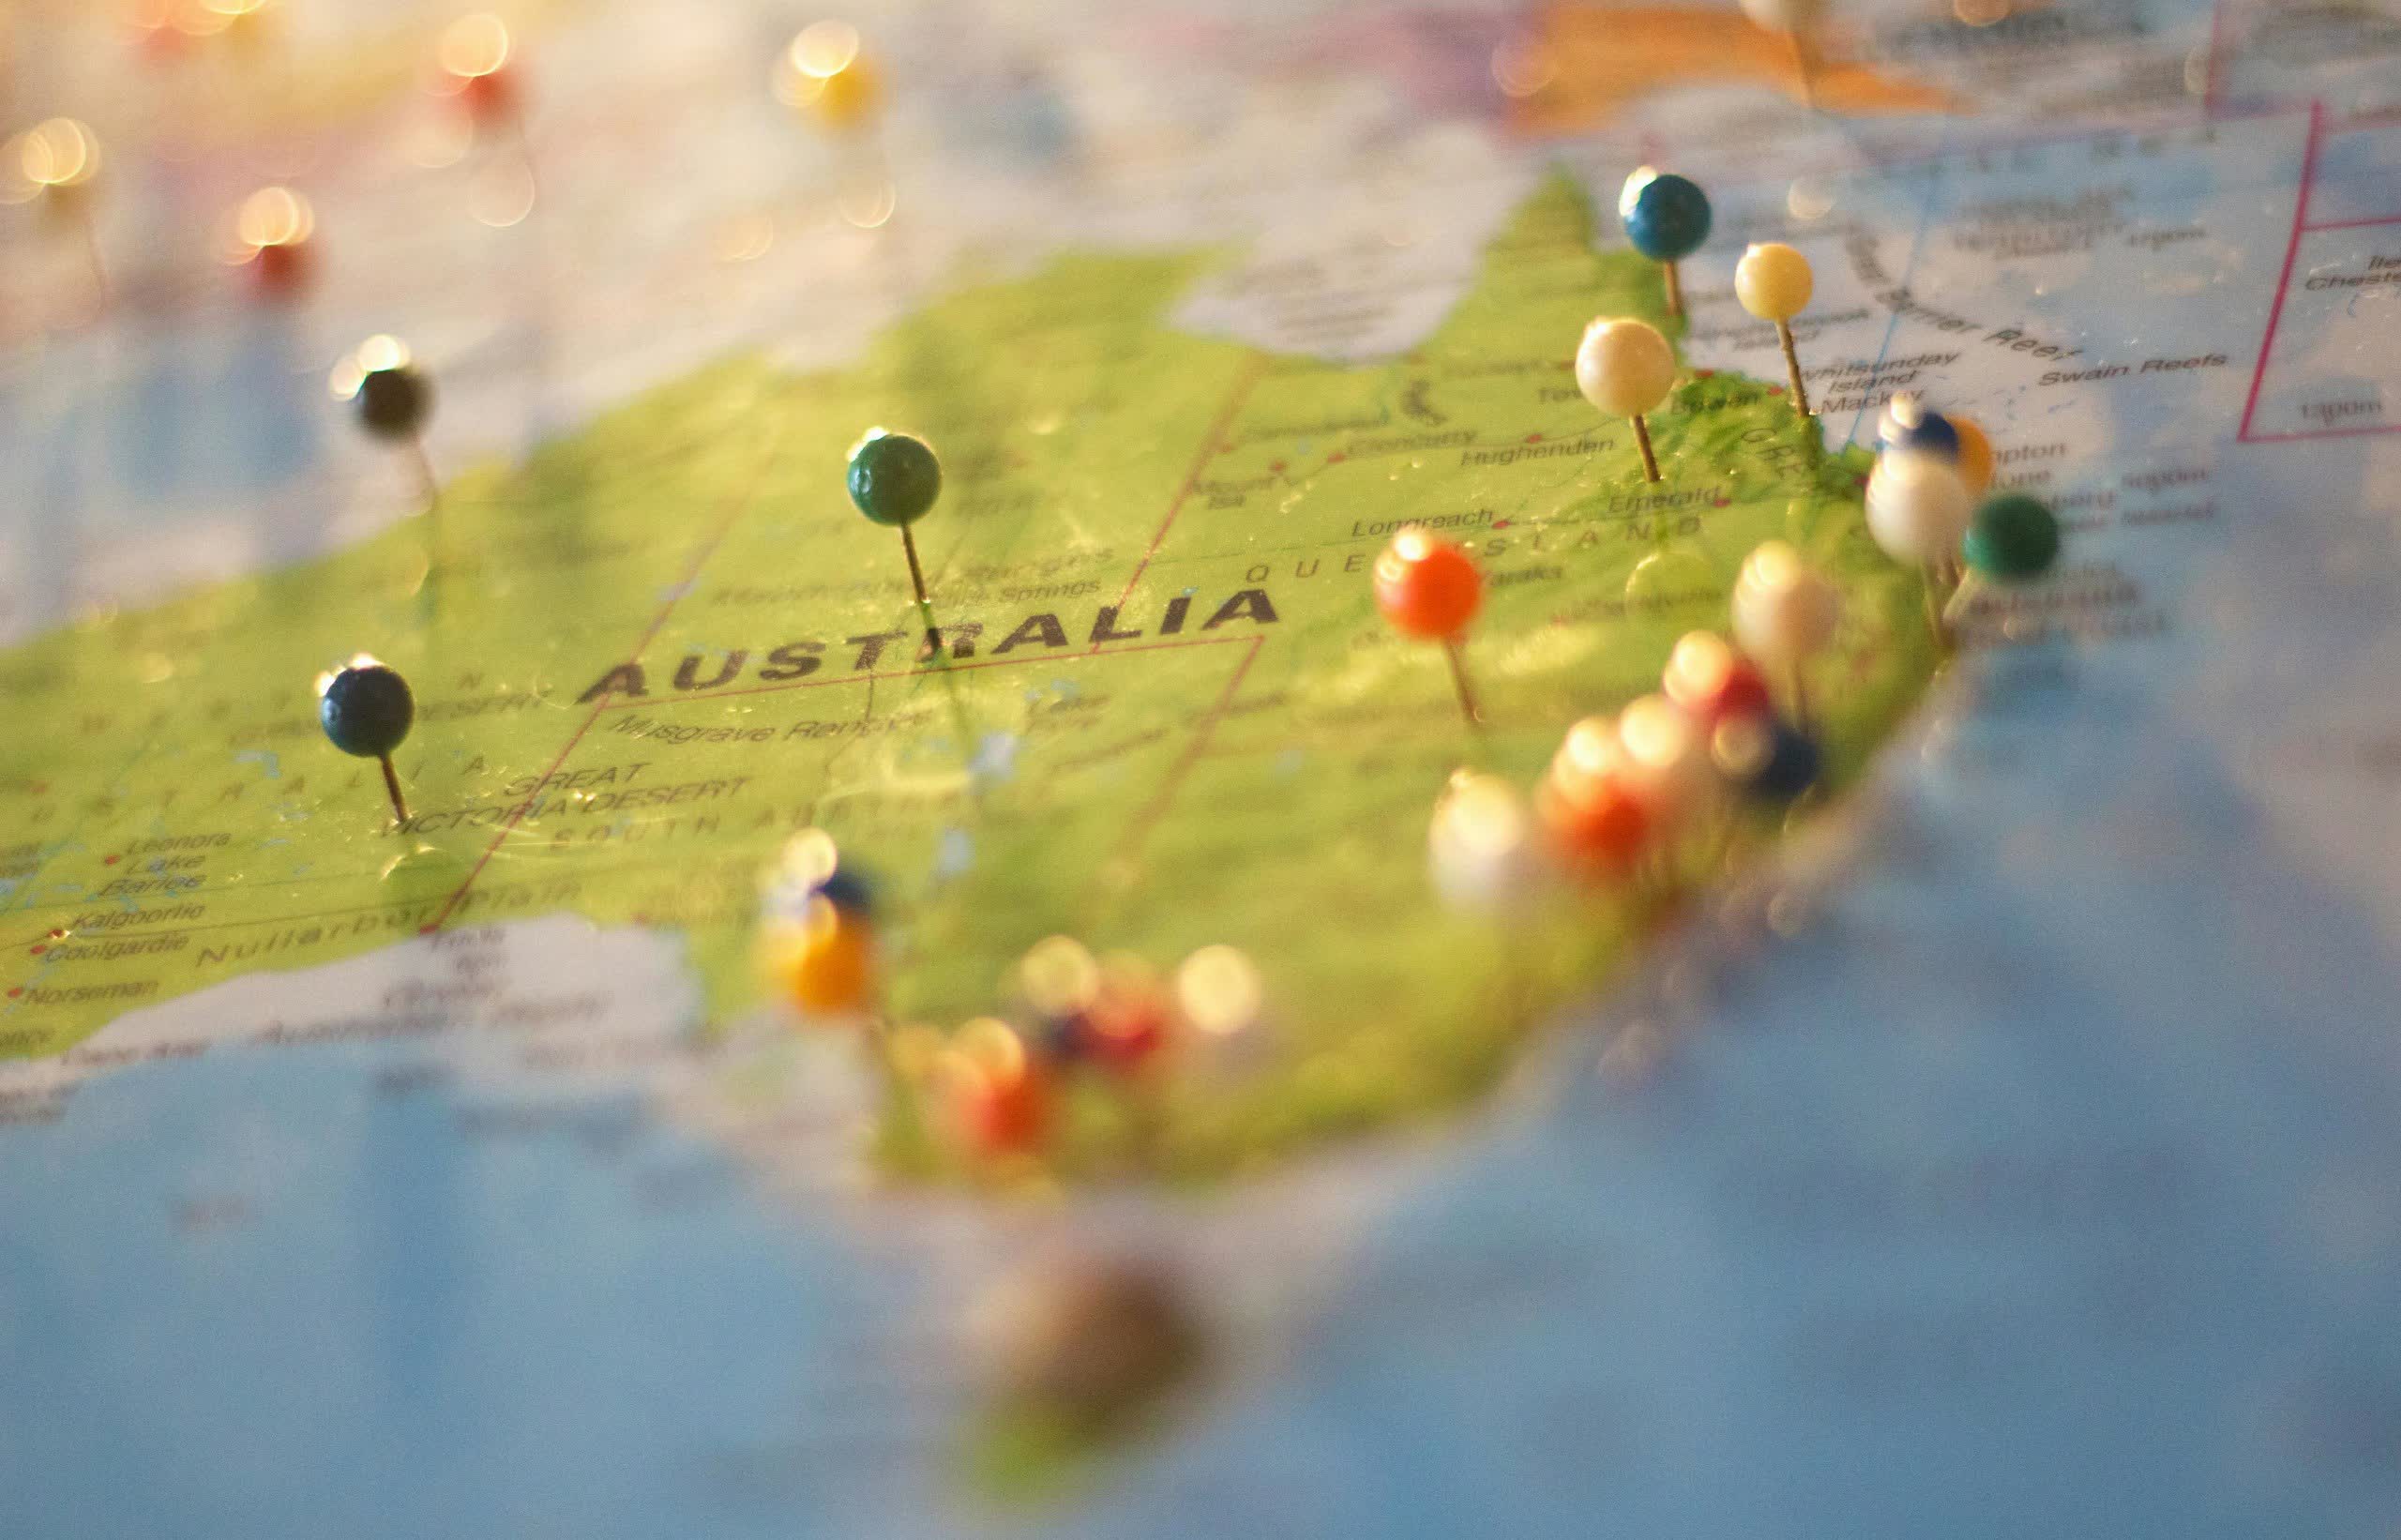 Microsoft's Bing search engine claims Australia doesn't exist